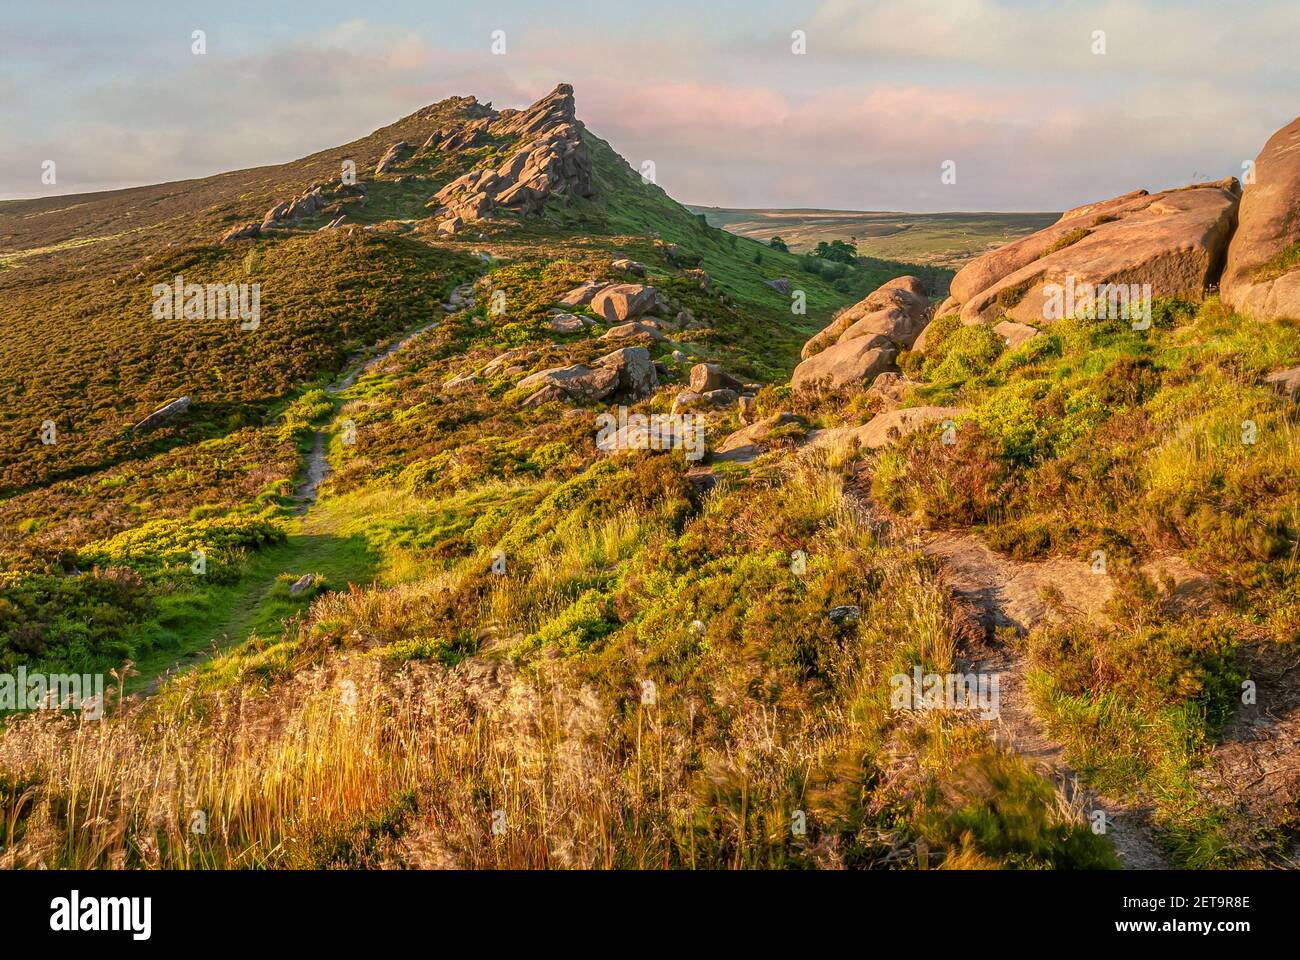 Ramshaw Rocks near The Roaches Rock Formation, Peak District, Staffordshire, England at sunset. Stock Photo